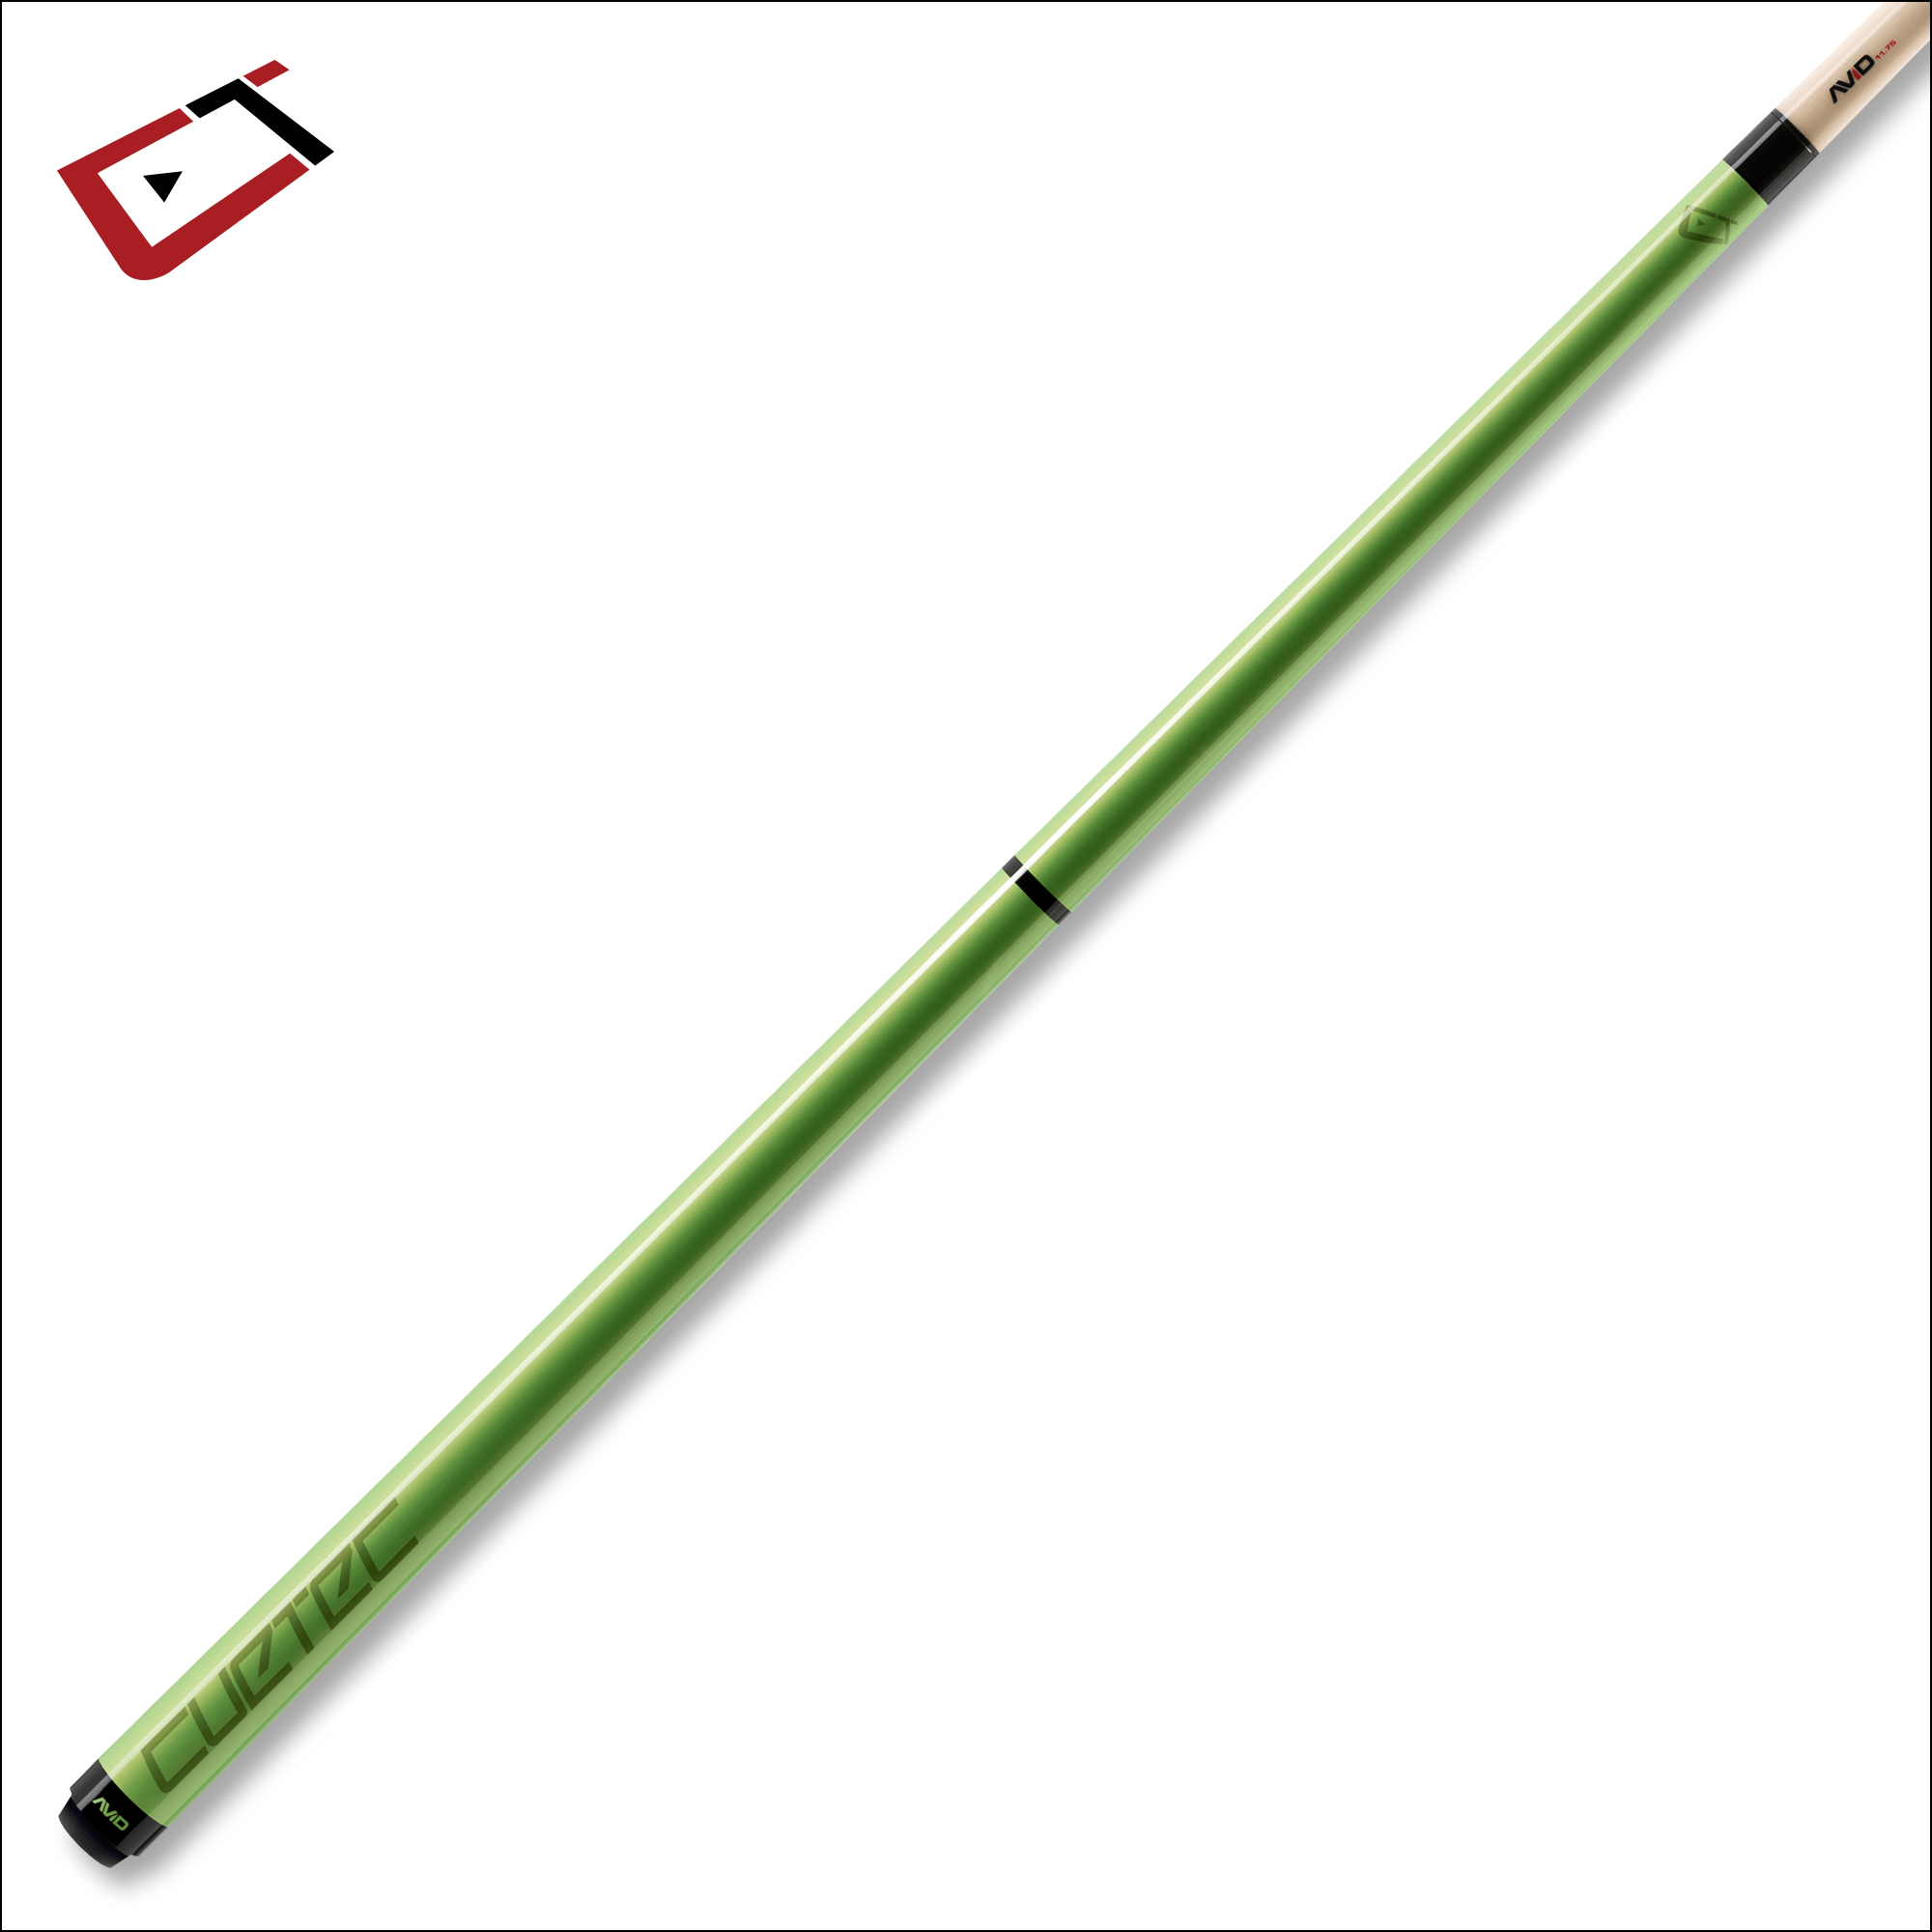 Imperial Pool Cue Imperial - AVID Chroma Currency Cue (12.75 Shaft) - 95-395NW